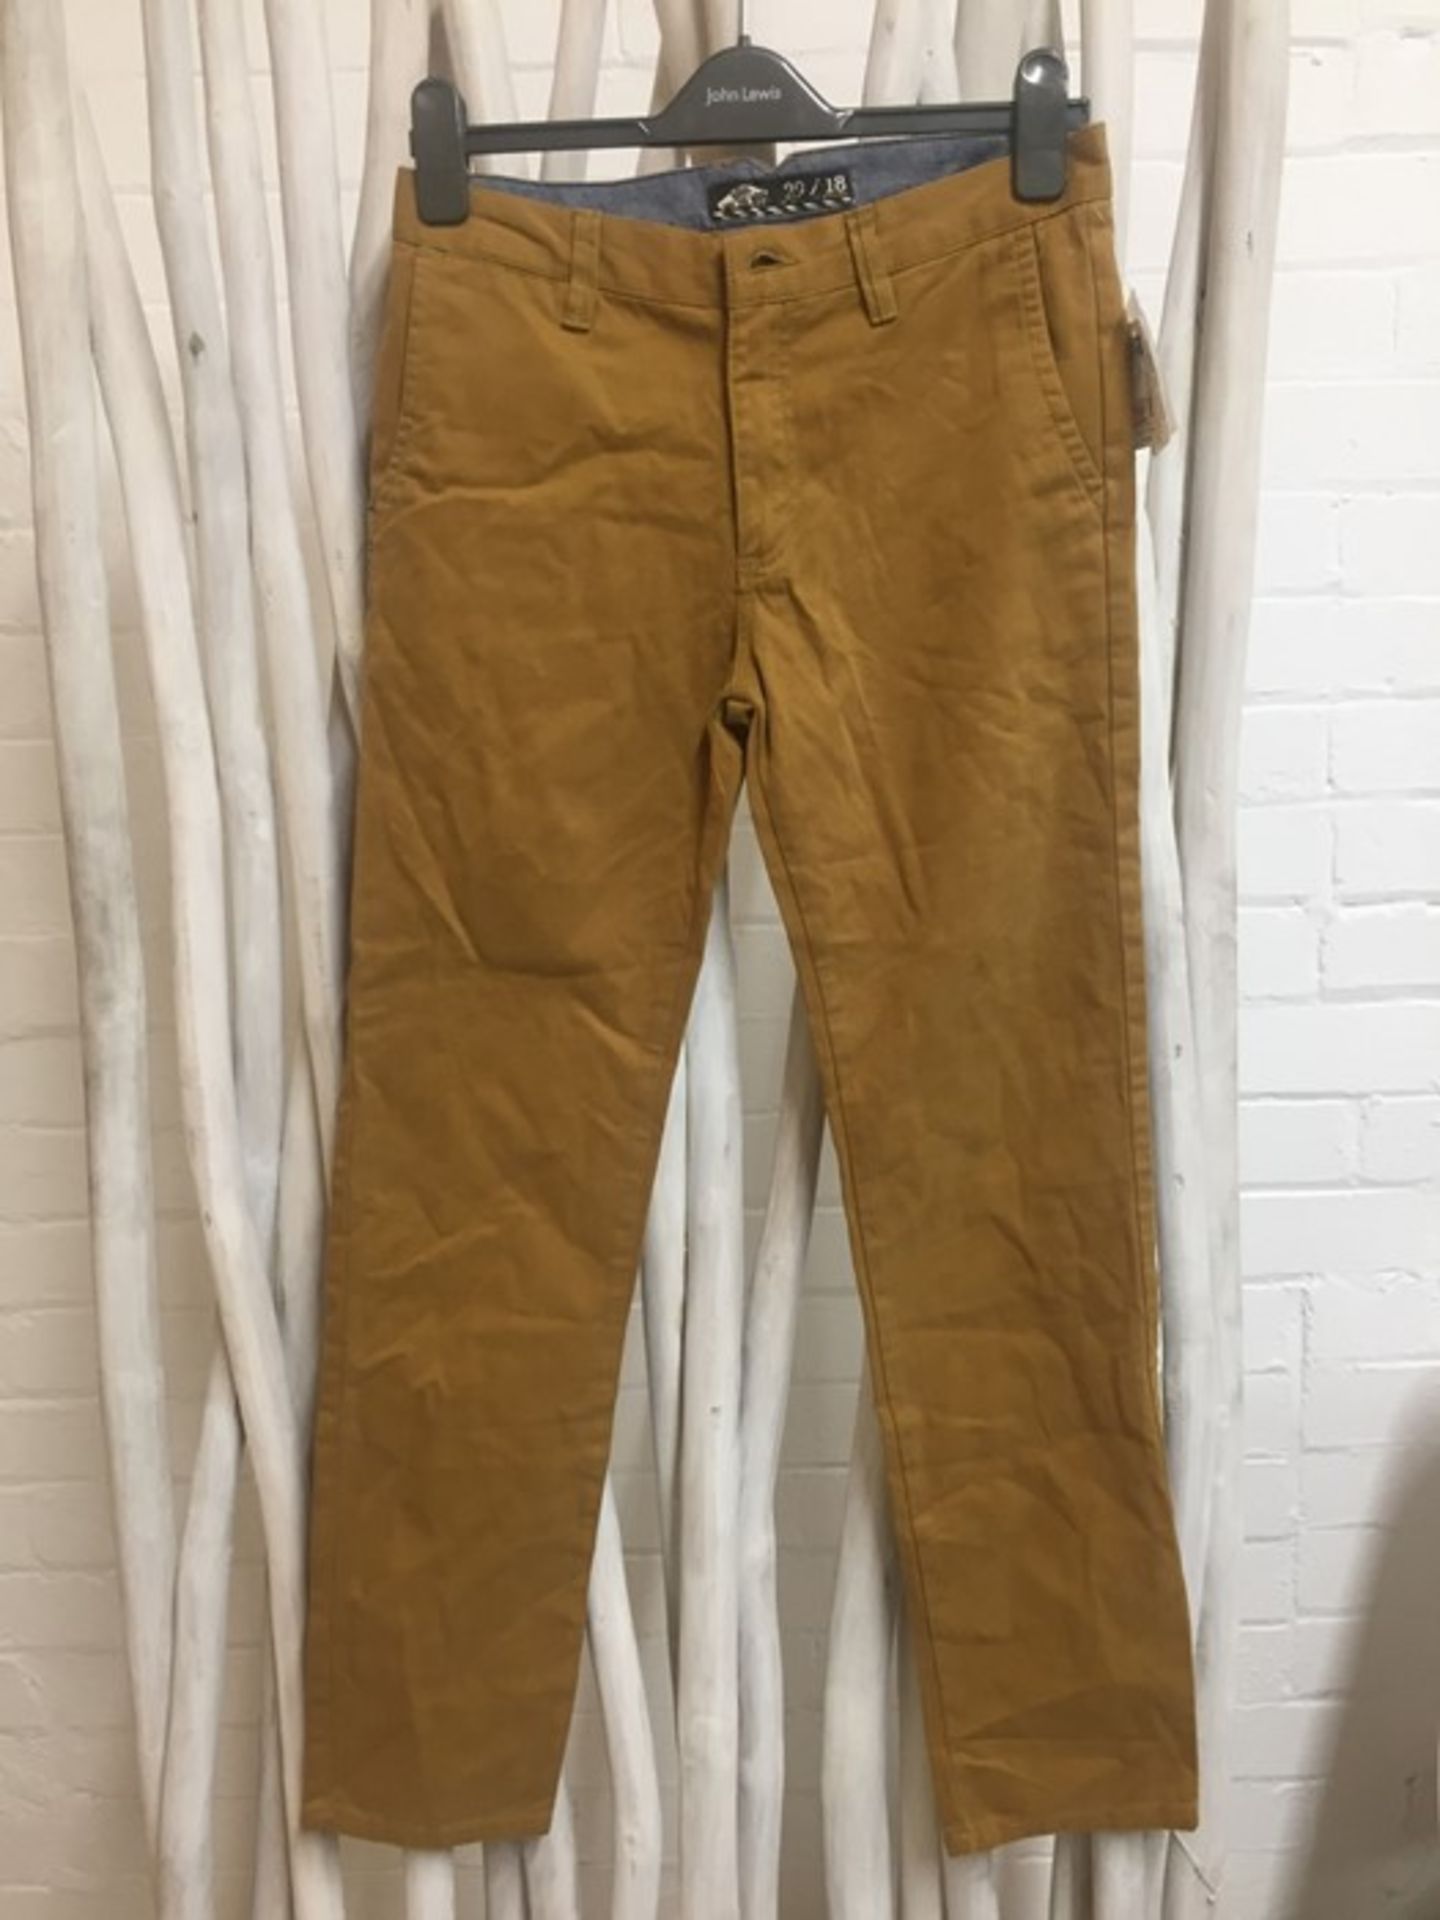 1 VANS YOUTHS TROUSERS BROWN IN W18 L29 / RRP £55.00 (PUBLIC VIEWING AVAILABLE)